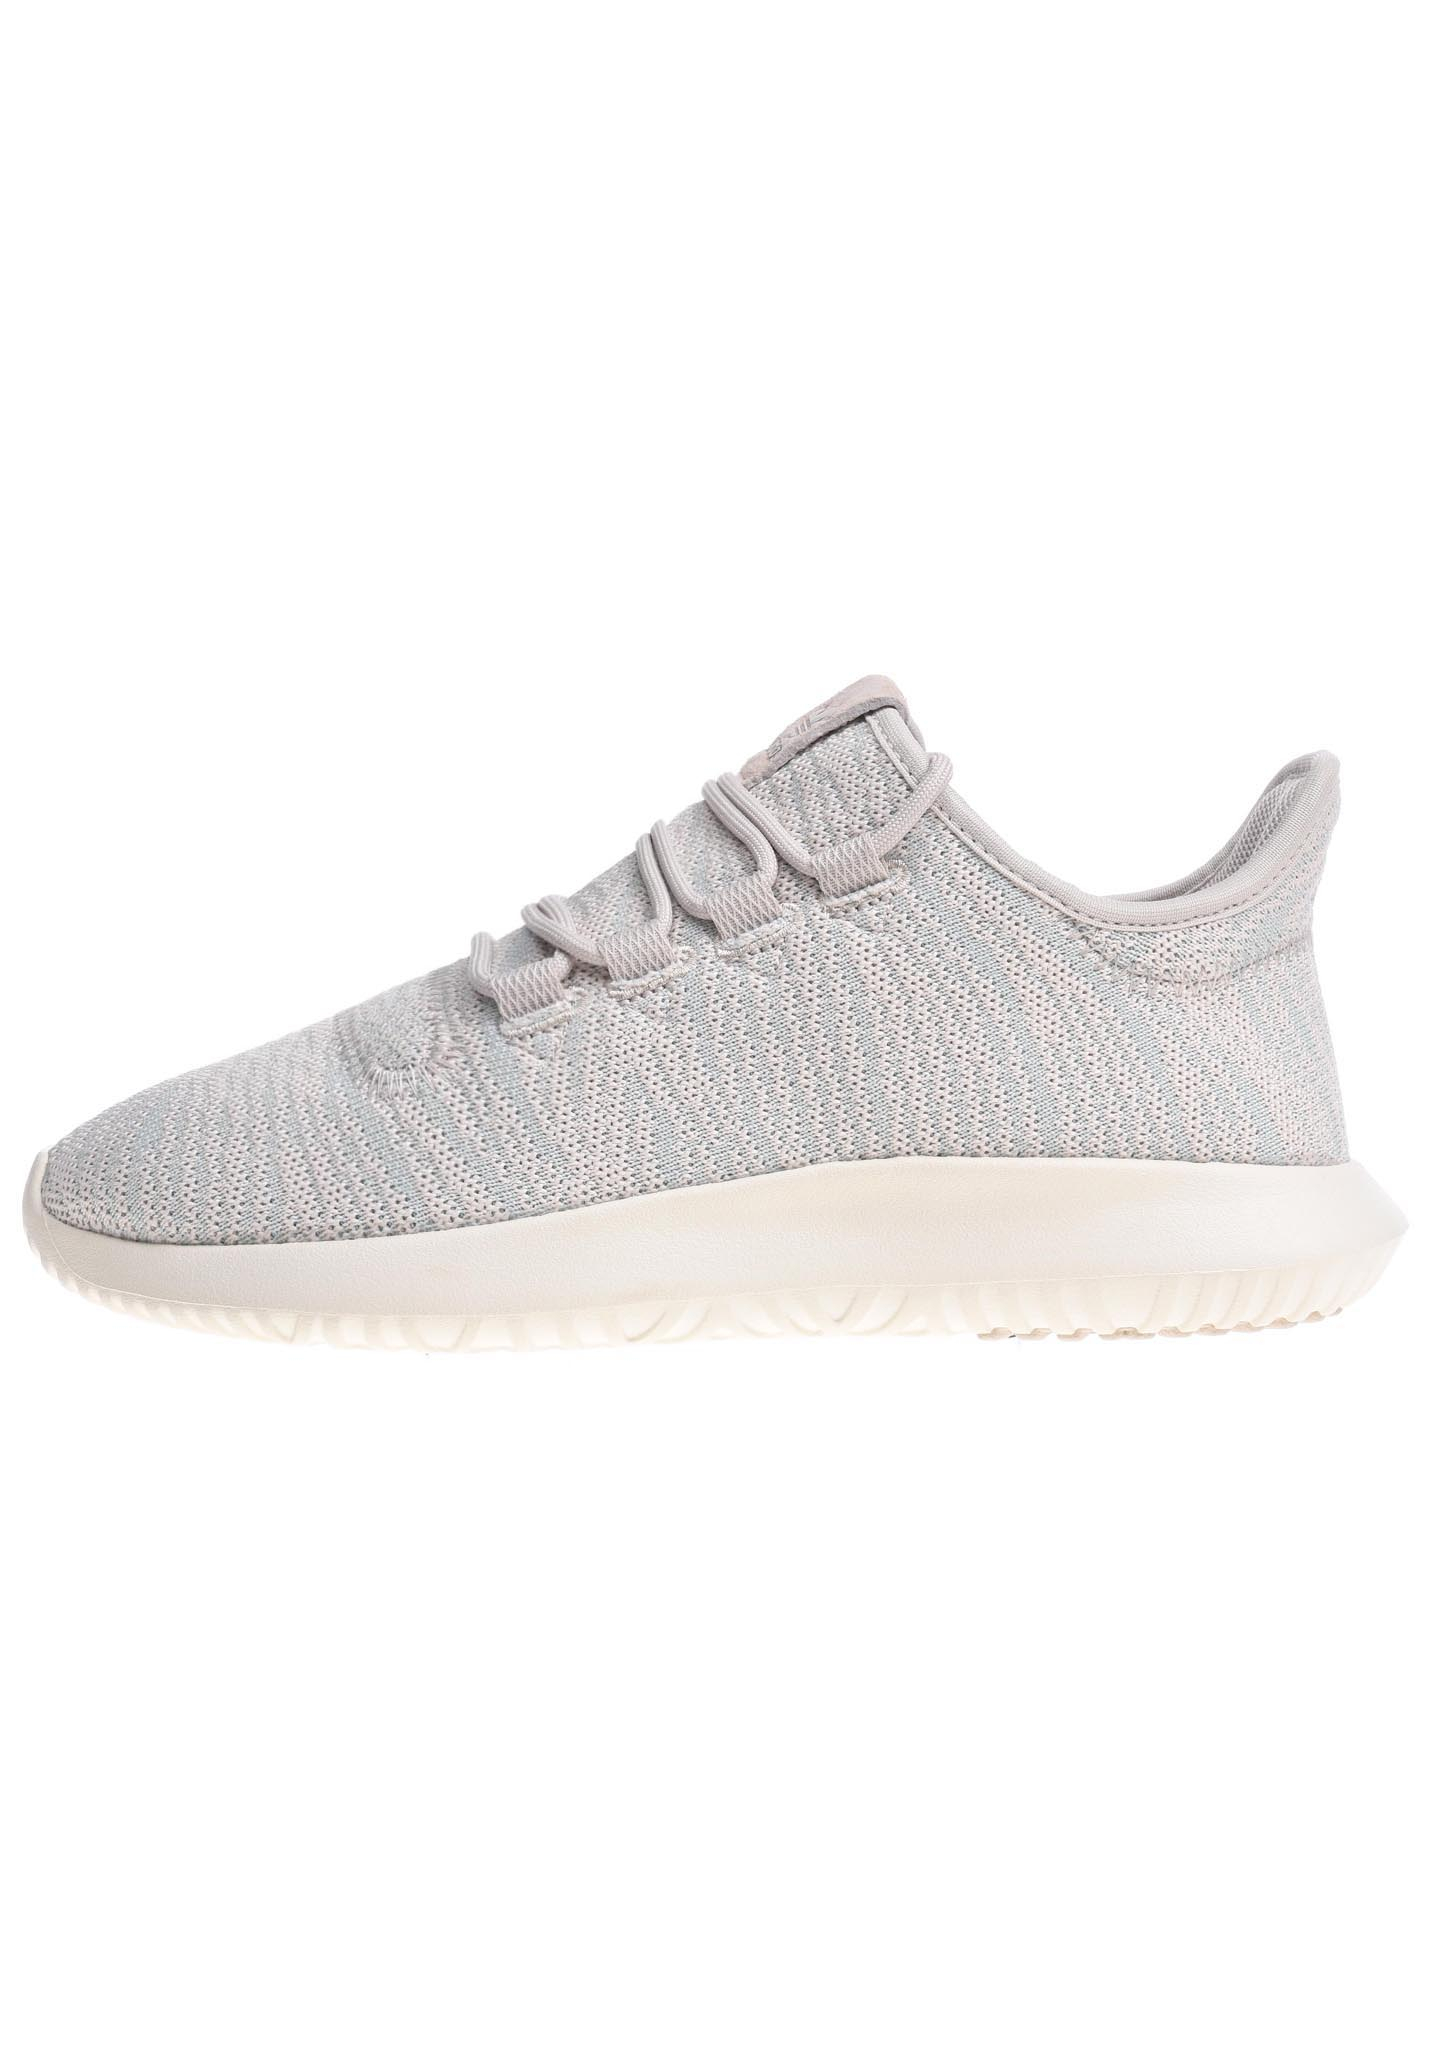 Adidas Originals Tubular Shadow Sneaker Low clear brown/ash green /off white 41 1/3